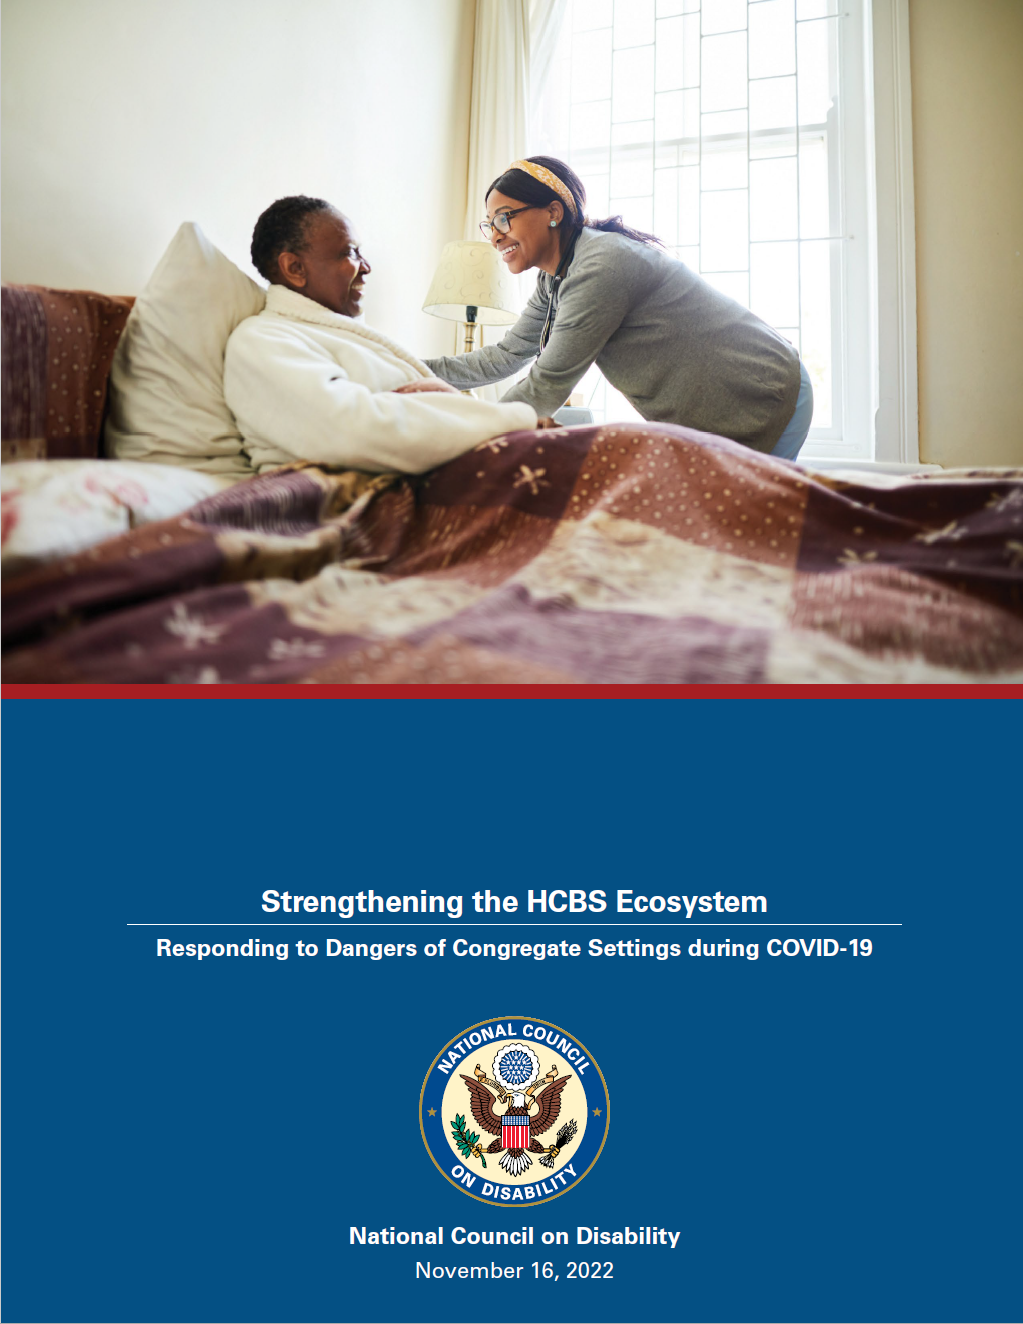 Image of smiling young nurse attending to a senior black man with white shirt lying in bed during a home health visit. Below the image is a blue square with the NCD seal and title of report.